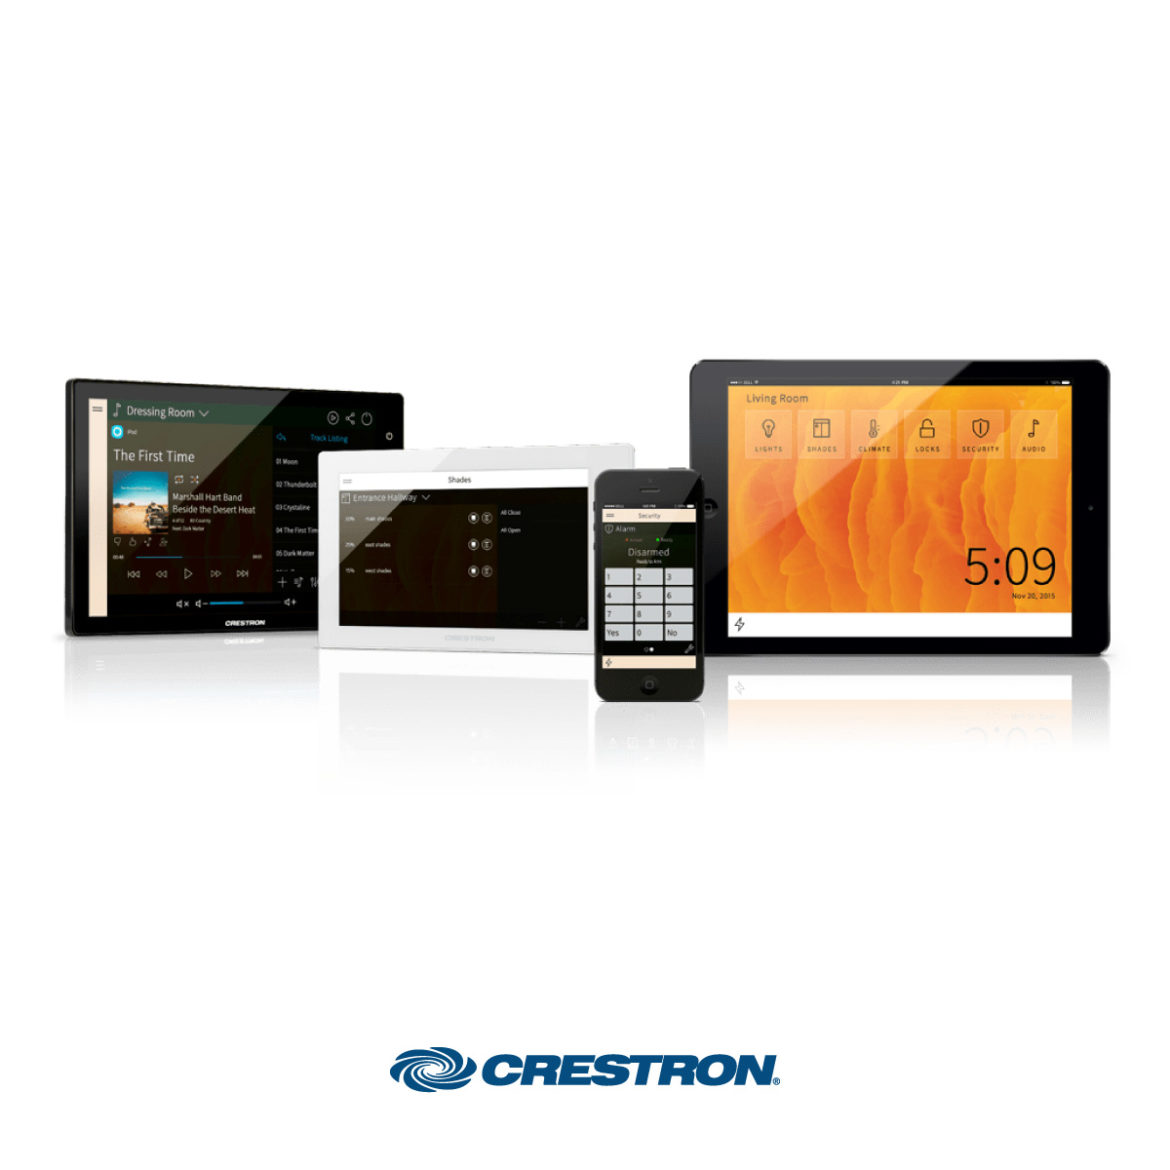 Crestron Pyng® Smart Device Integration for Home Automation